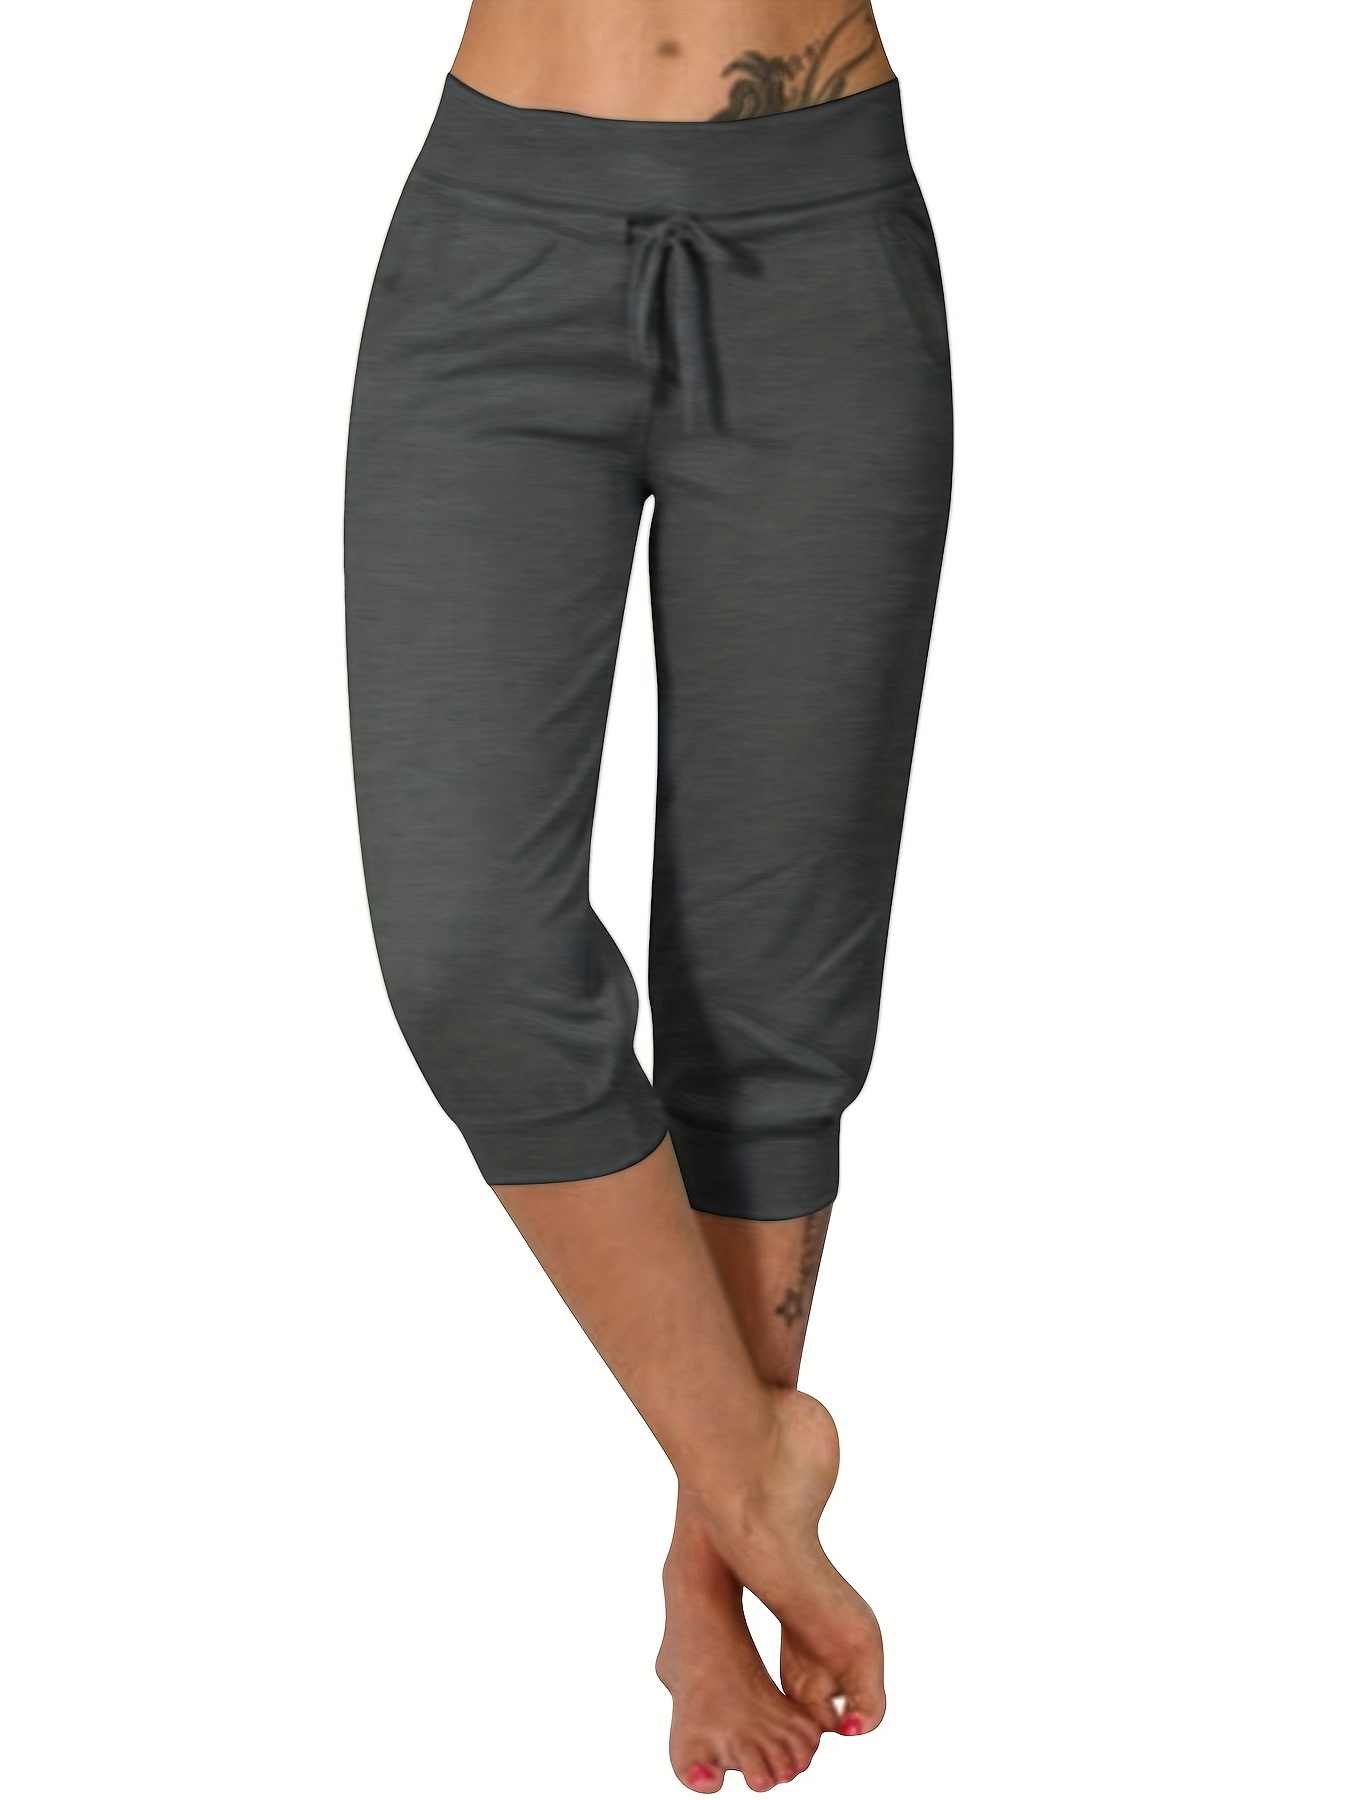 Solada Women's stretch capri pants: for sale at 9.99€ on